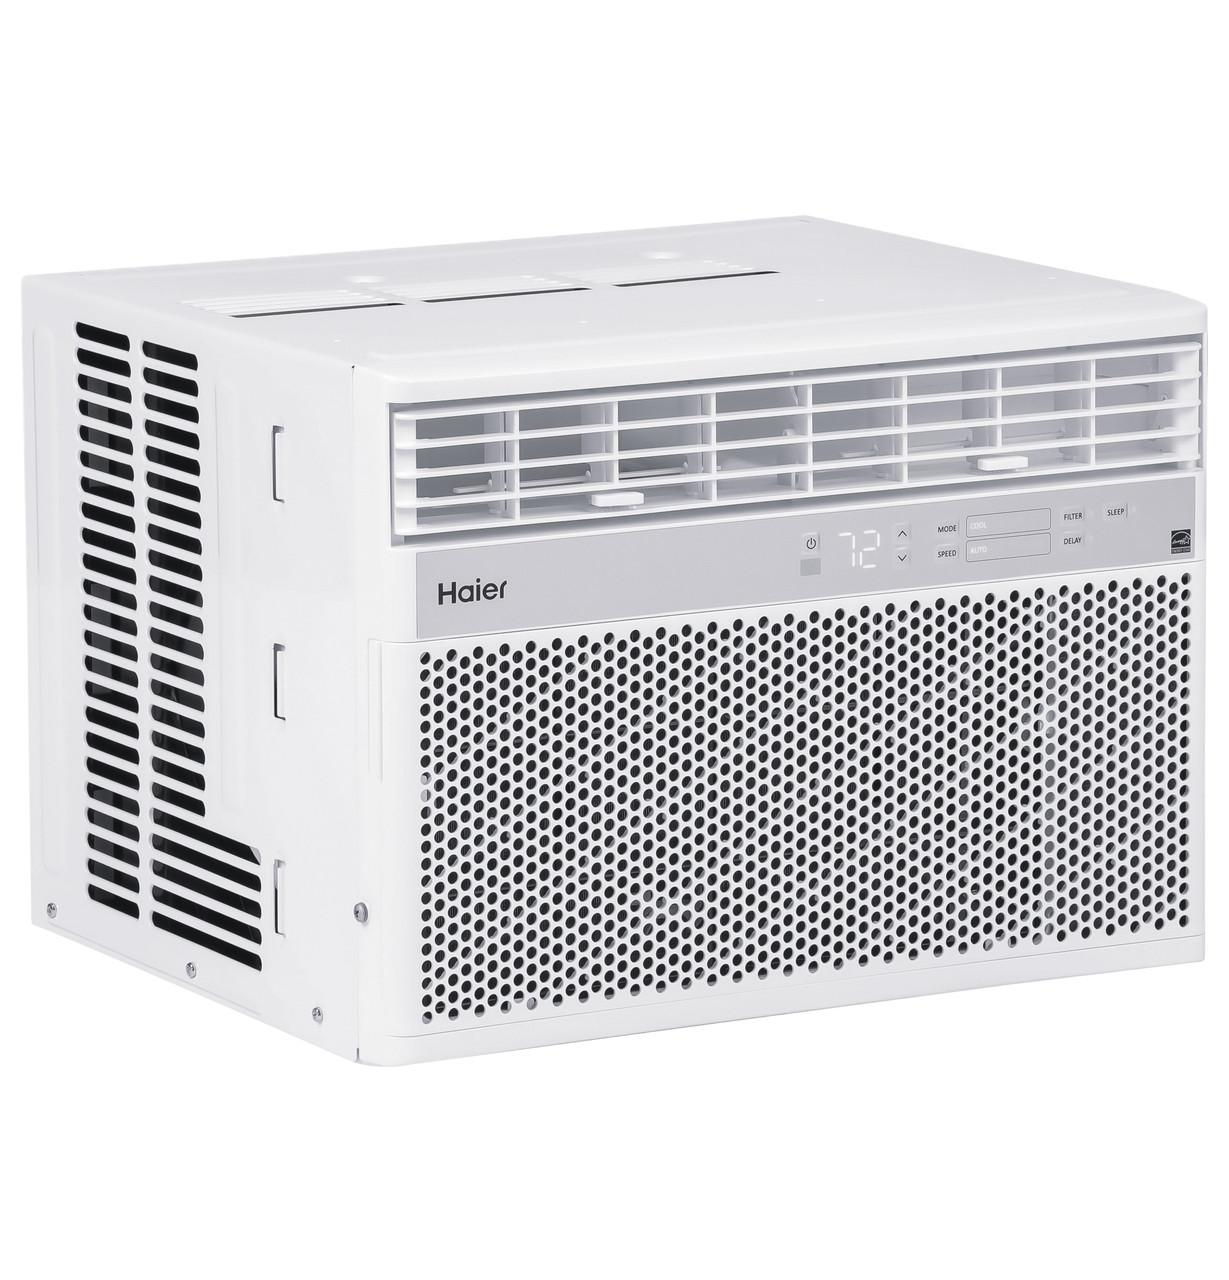 ENERGY STAR® 115 Volt Room Air Conditioner